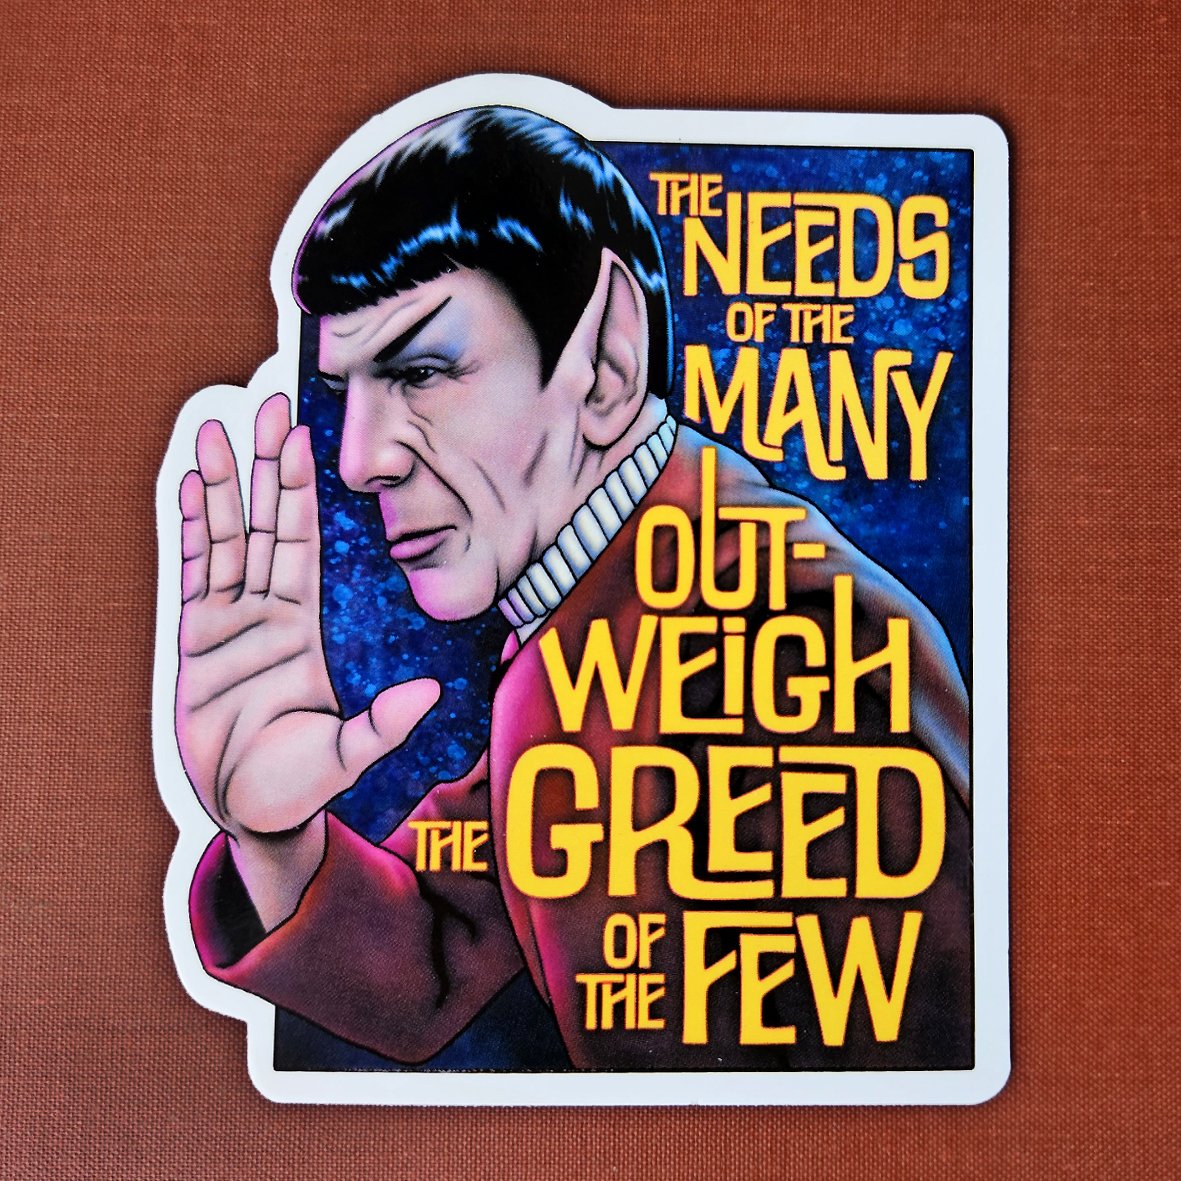 'The Needs of the Many Outweigh the Greed of the Few' stickers are here! Just in time for Labor Day. For each one sold, I'll be contributing $1 to the Entertainment Community Fund to help WGA and SAG-AFTRA members weather the strike. willburrows.art/shop